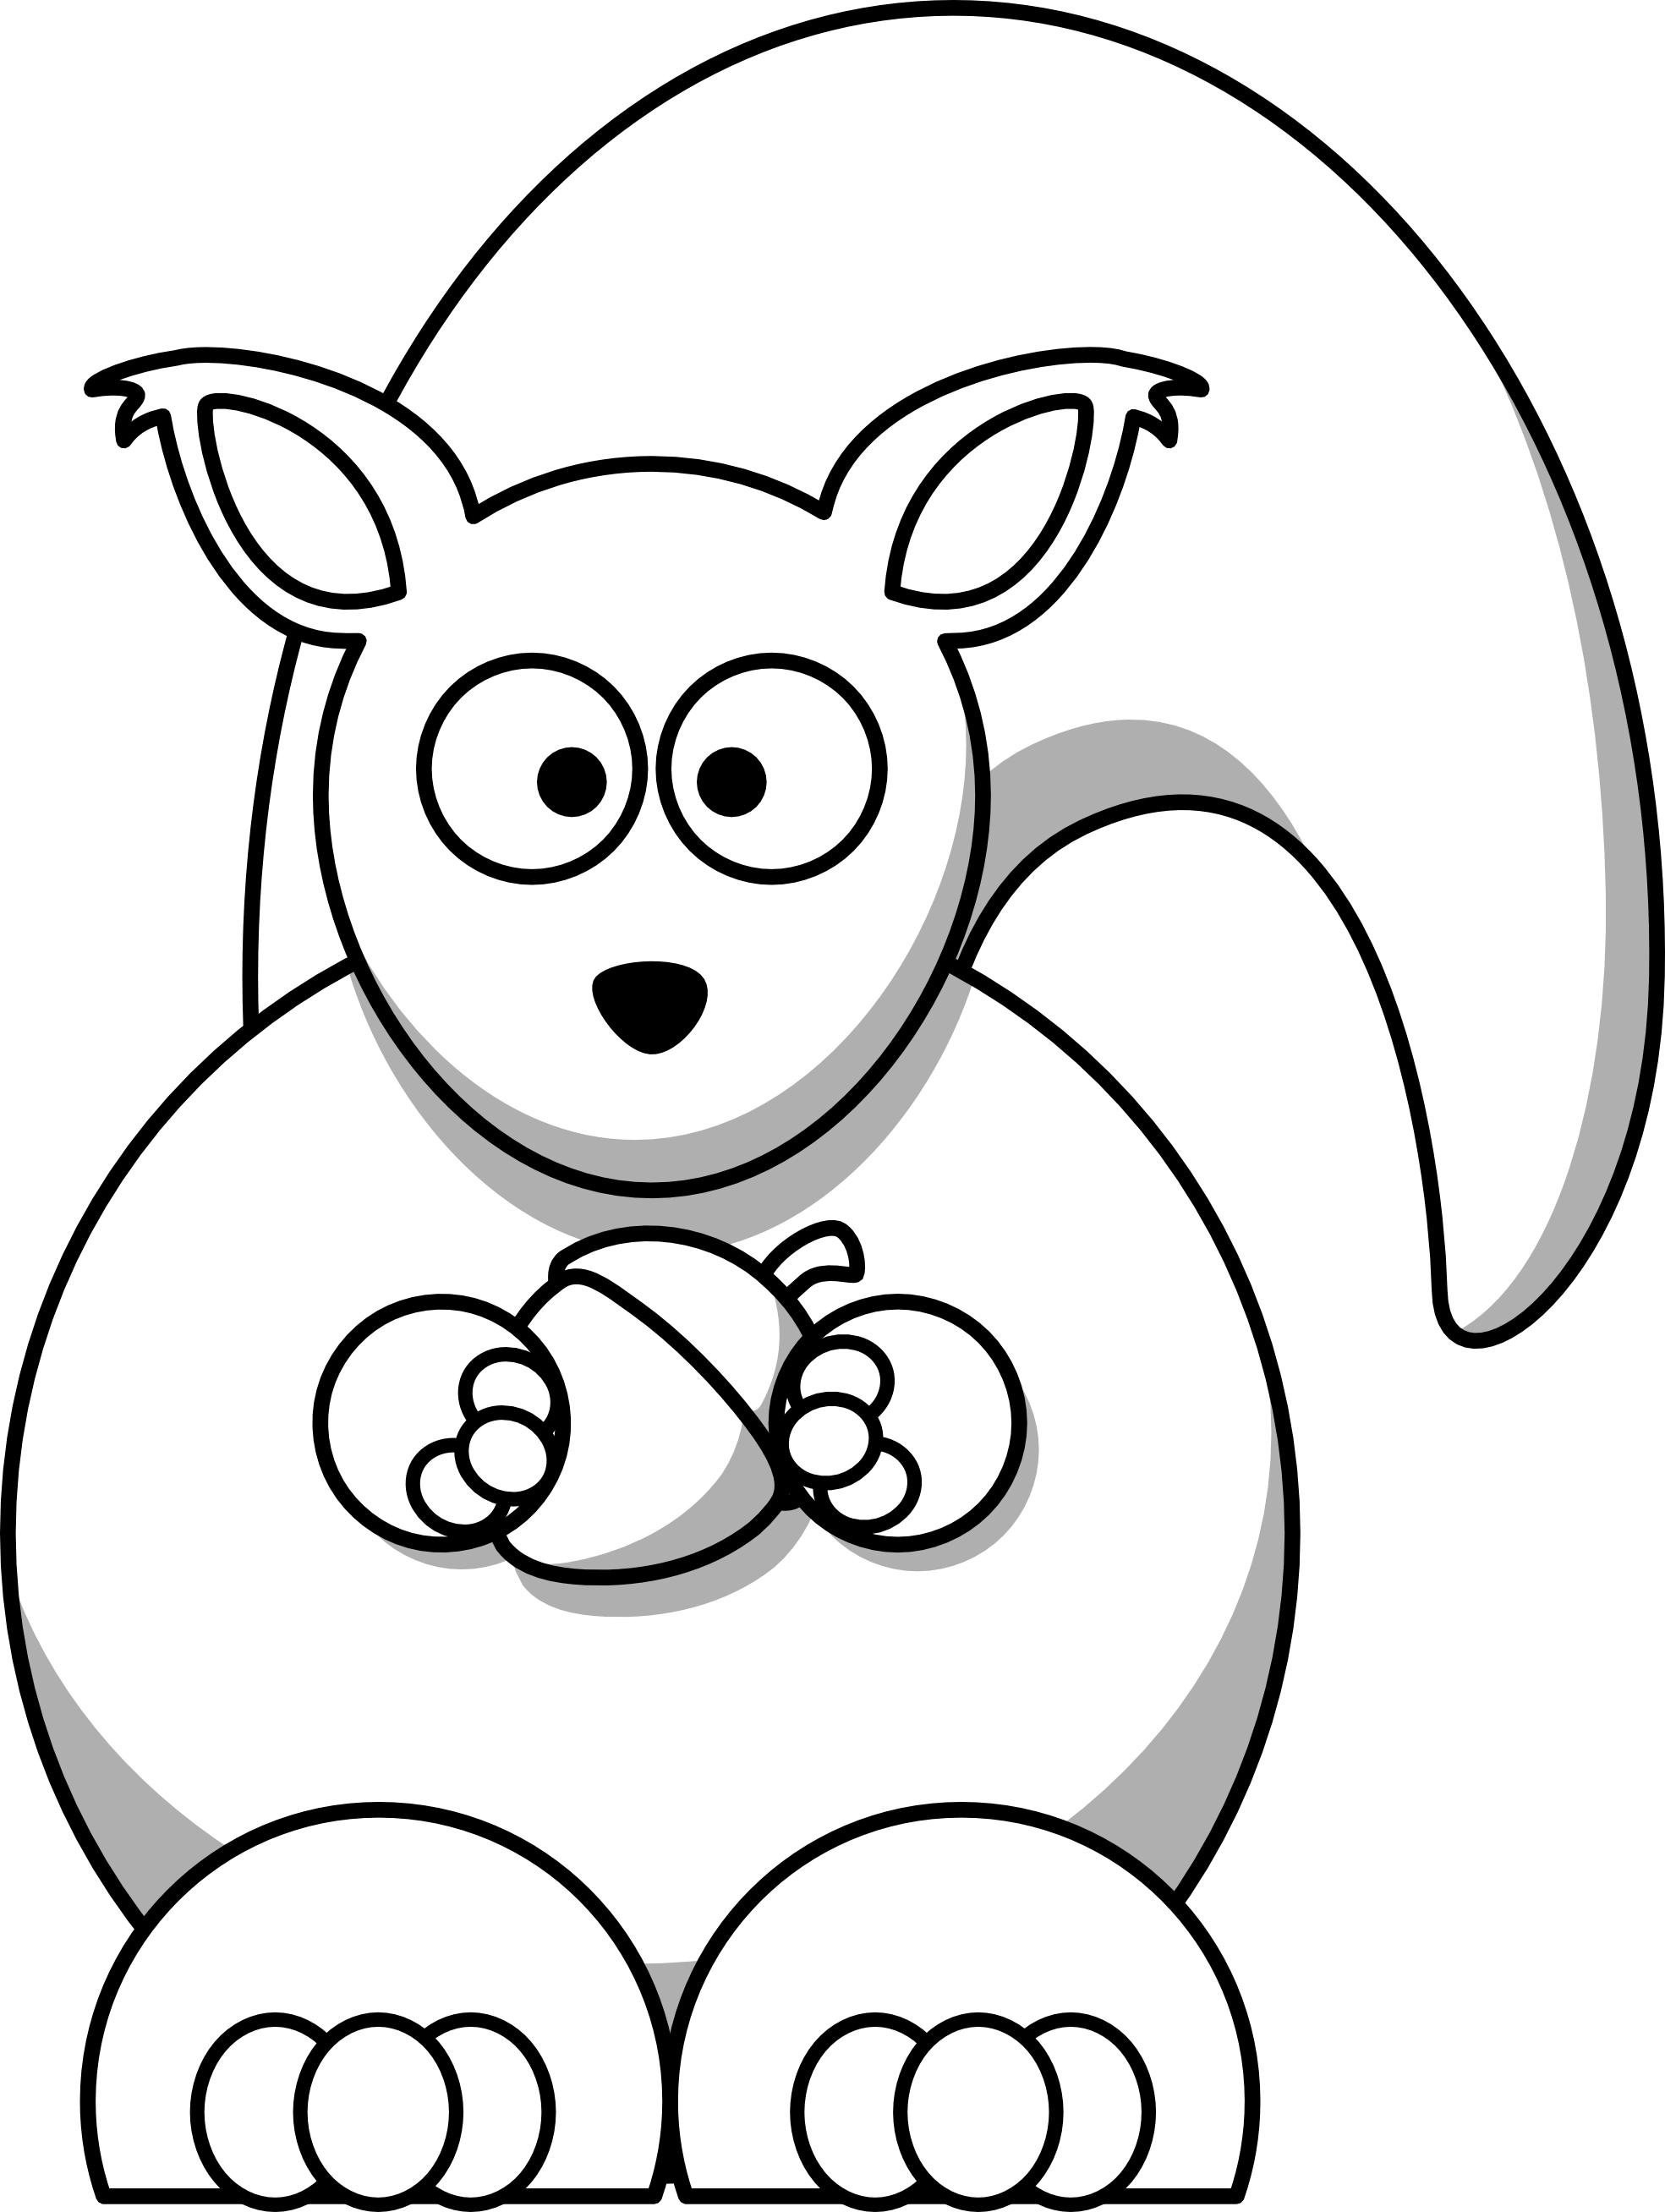 Clip Art Black And White   Clipart Panda   Free Clipart Images